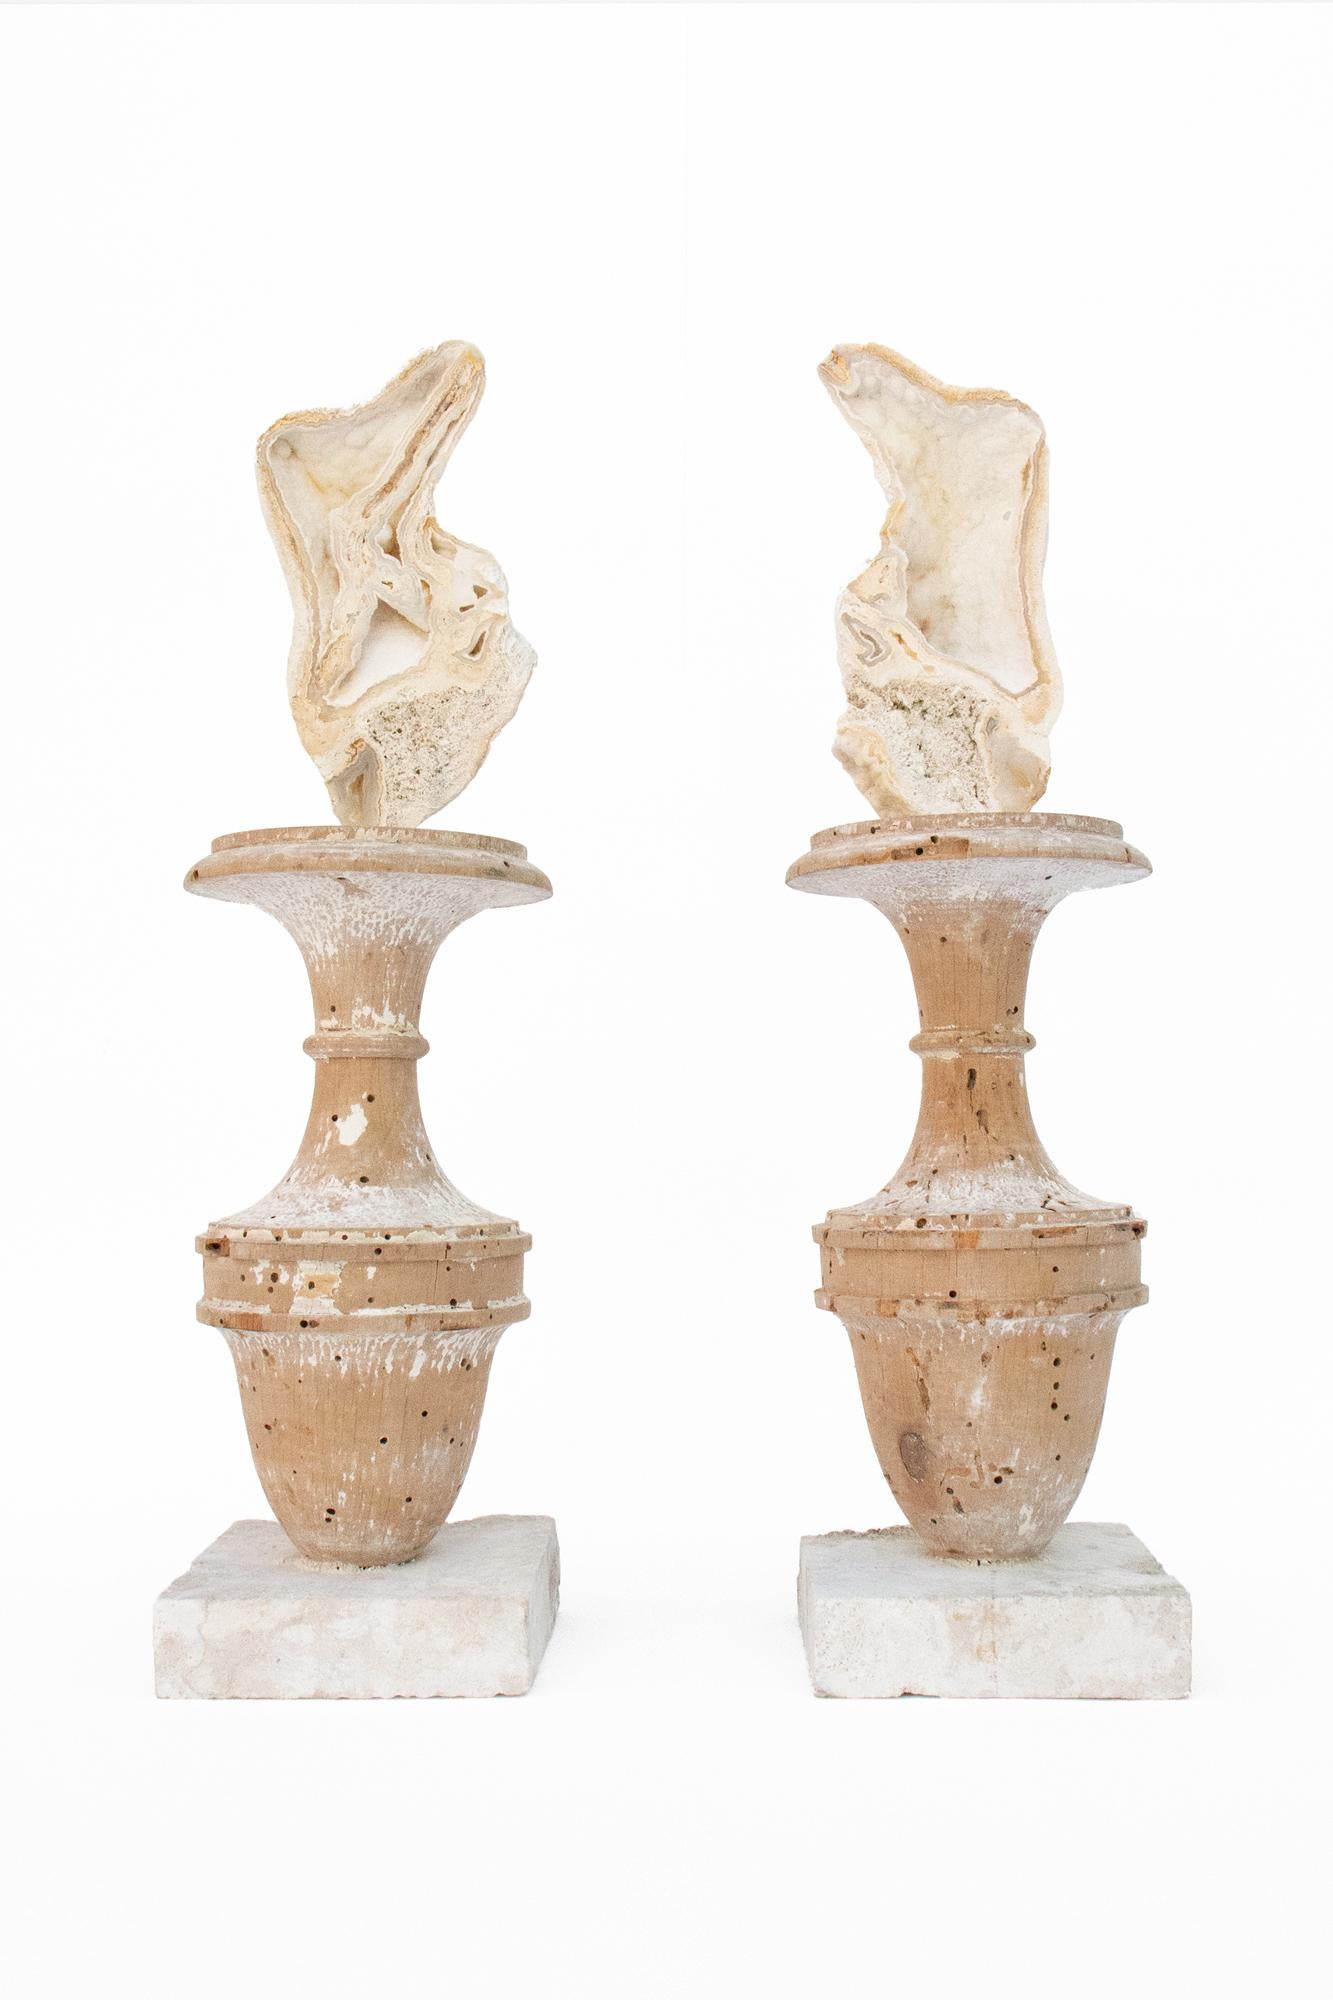 A pair of 17th century Italian fragment vases decorated with fossil agate coral on cut rock coral bases.

The pair is from a church in Florence. They were found and saved from the historic flooding of the Arno River in 1966. The pair of fossil agate